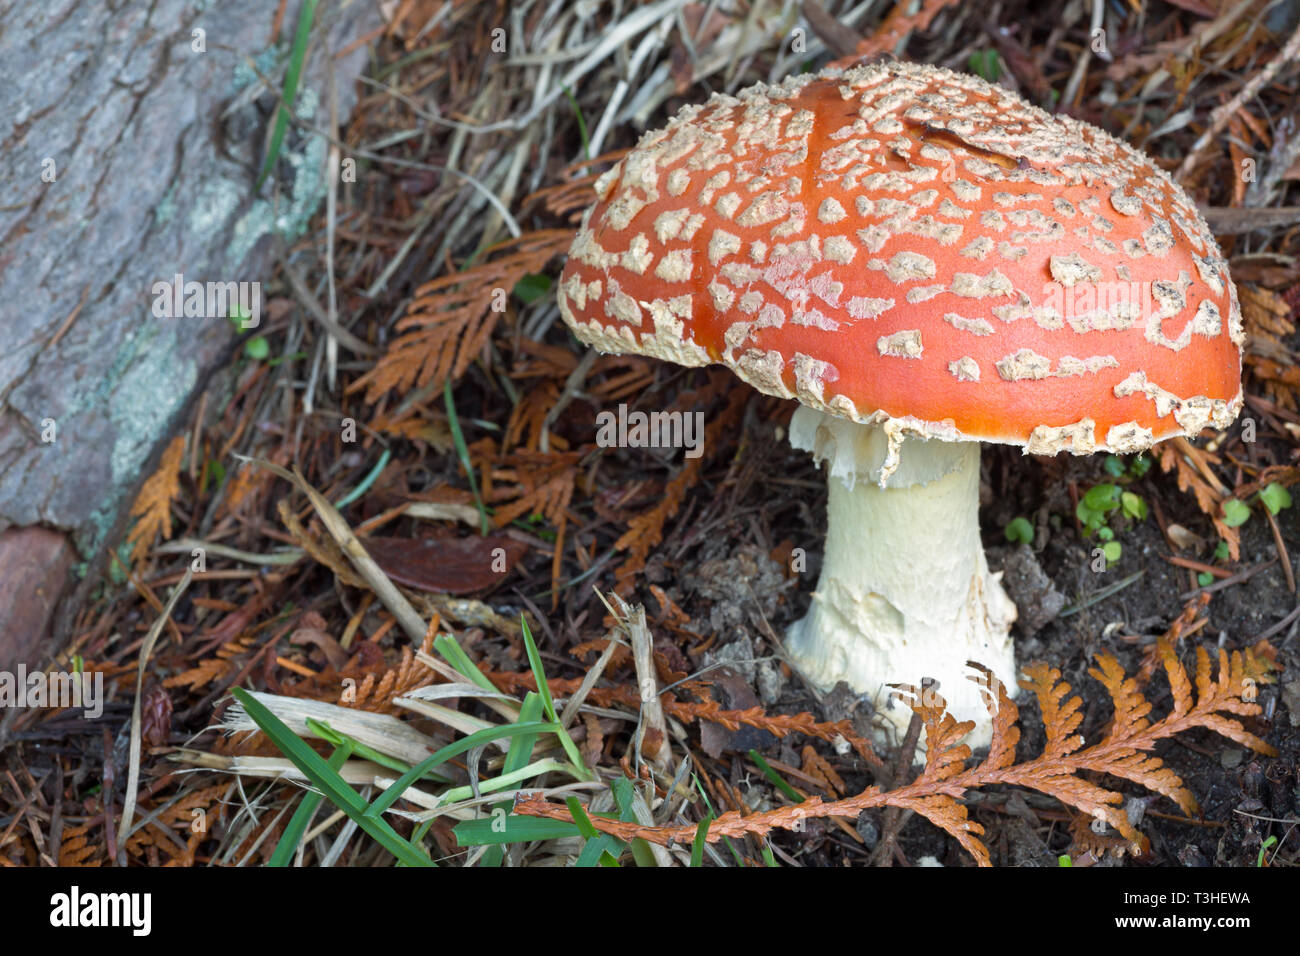 WA16118-00...WASHINGTON - A poisonous Fly Agaric growing under the shelter of a cedar tree in the Puget Sound Basin. Stock Photo